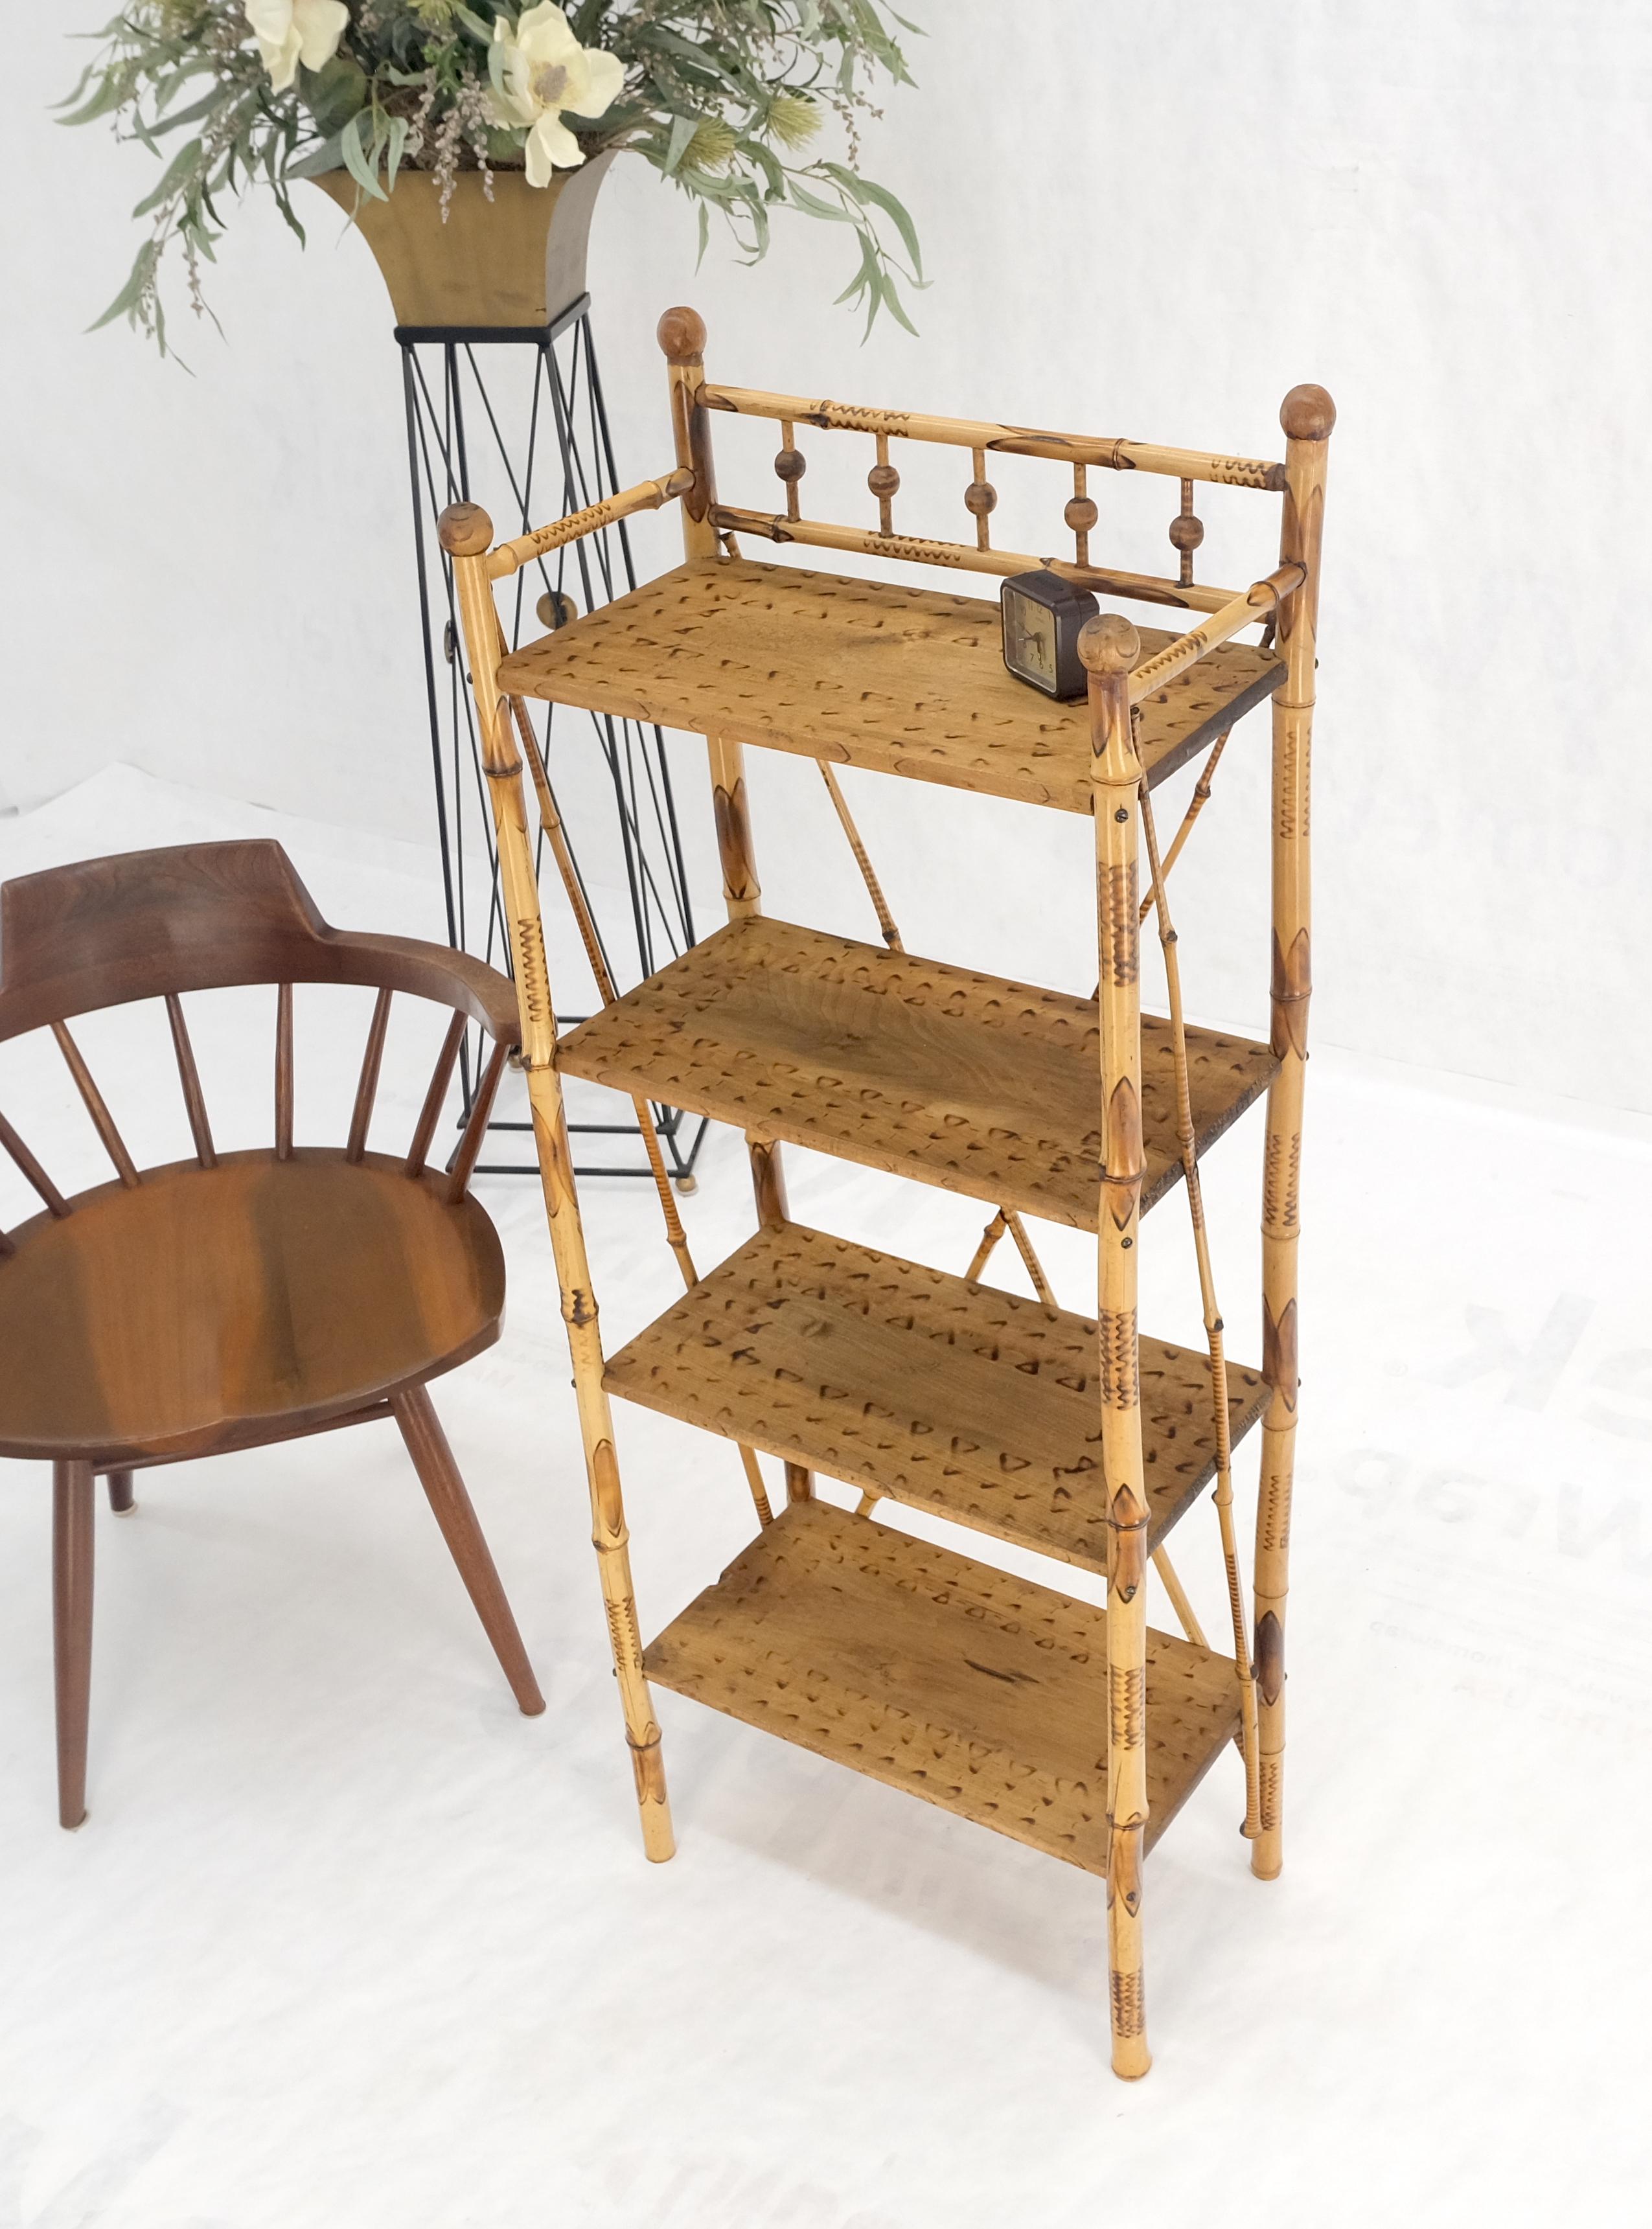 Burnt Bamboo Ball Finials 4 Tier Small Decorative Etagere Shelving Bookcase MINT For Sale 1